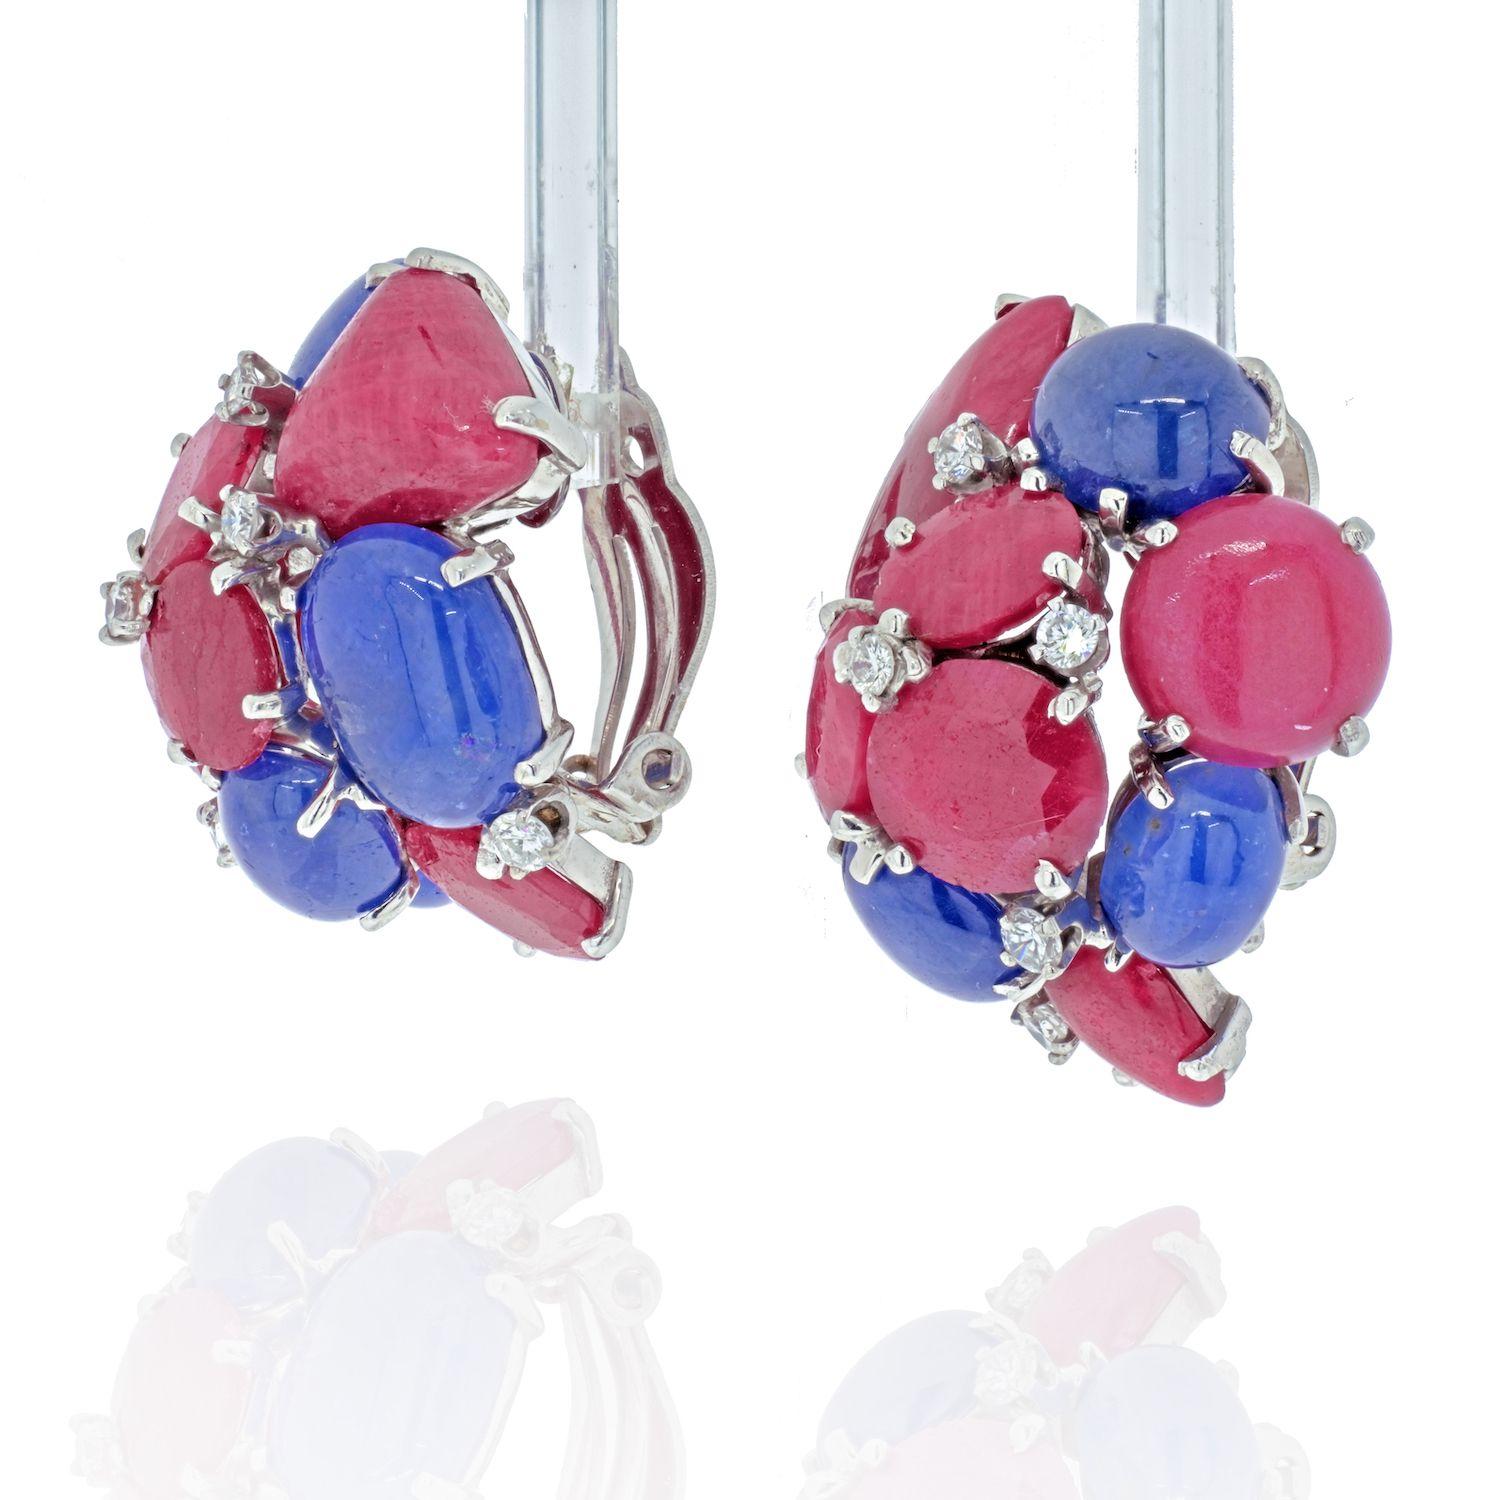 Seaman Schepps earrings of cluster design, set with cabochon sapphires and faceted and cabochon rubies, enhanced by round brilliant-cut diamonds, circa 1970s.
Signed P.S.V. of Seaman Schepps.

Length: 1 ¼ x 1 ins